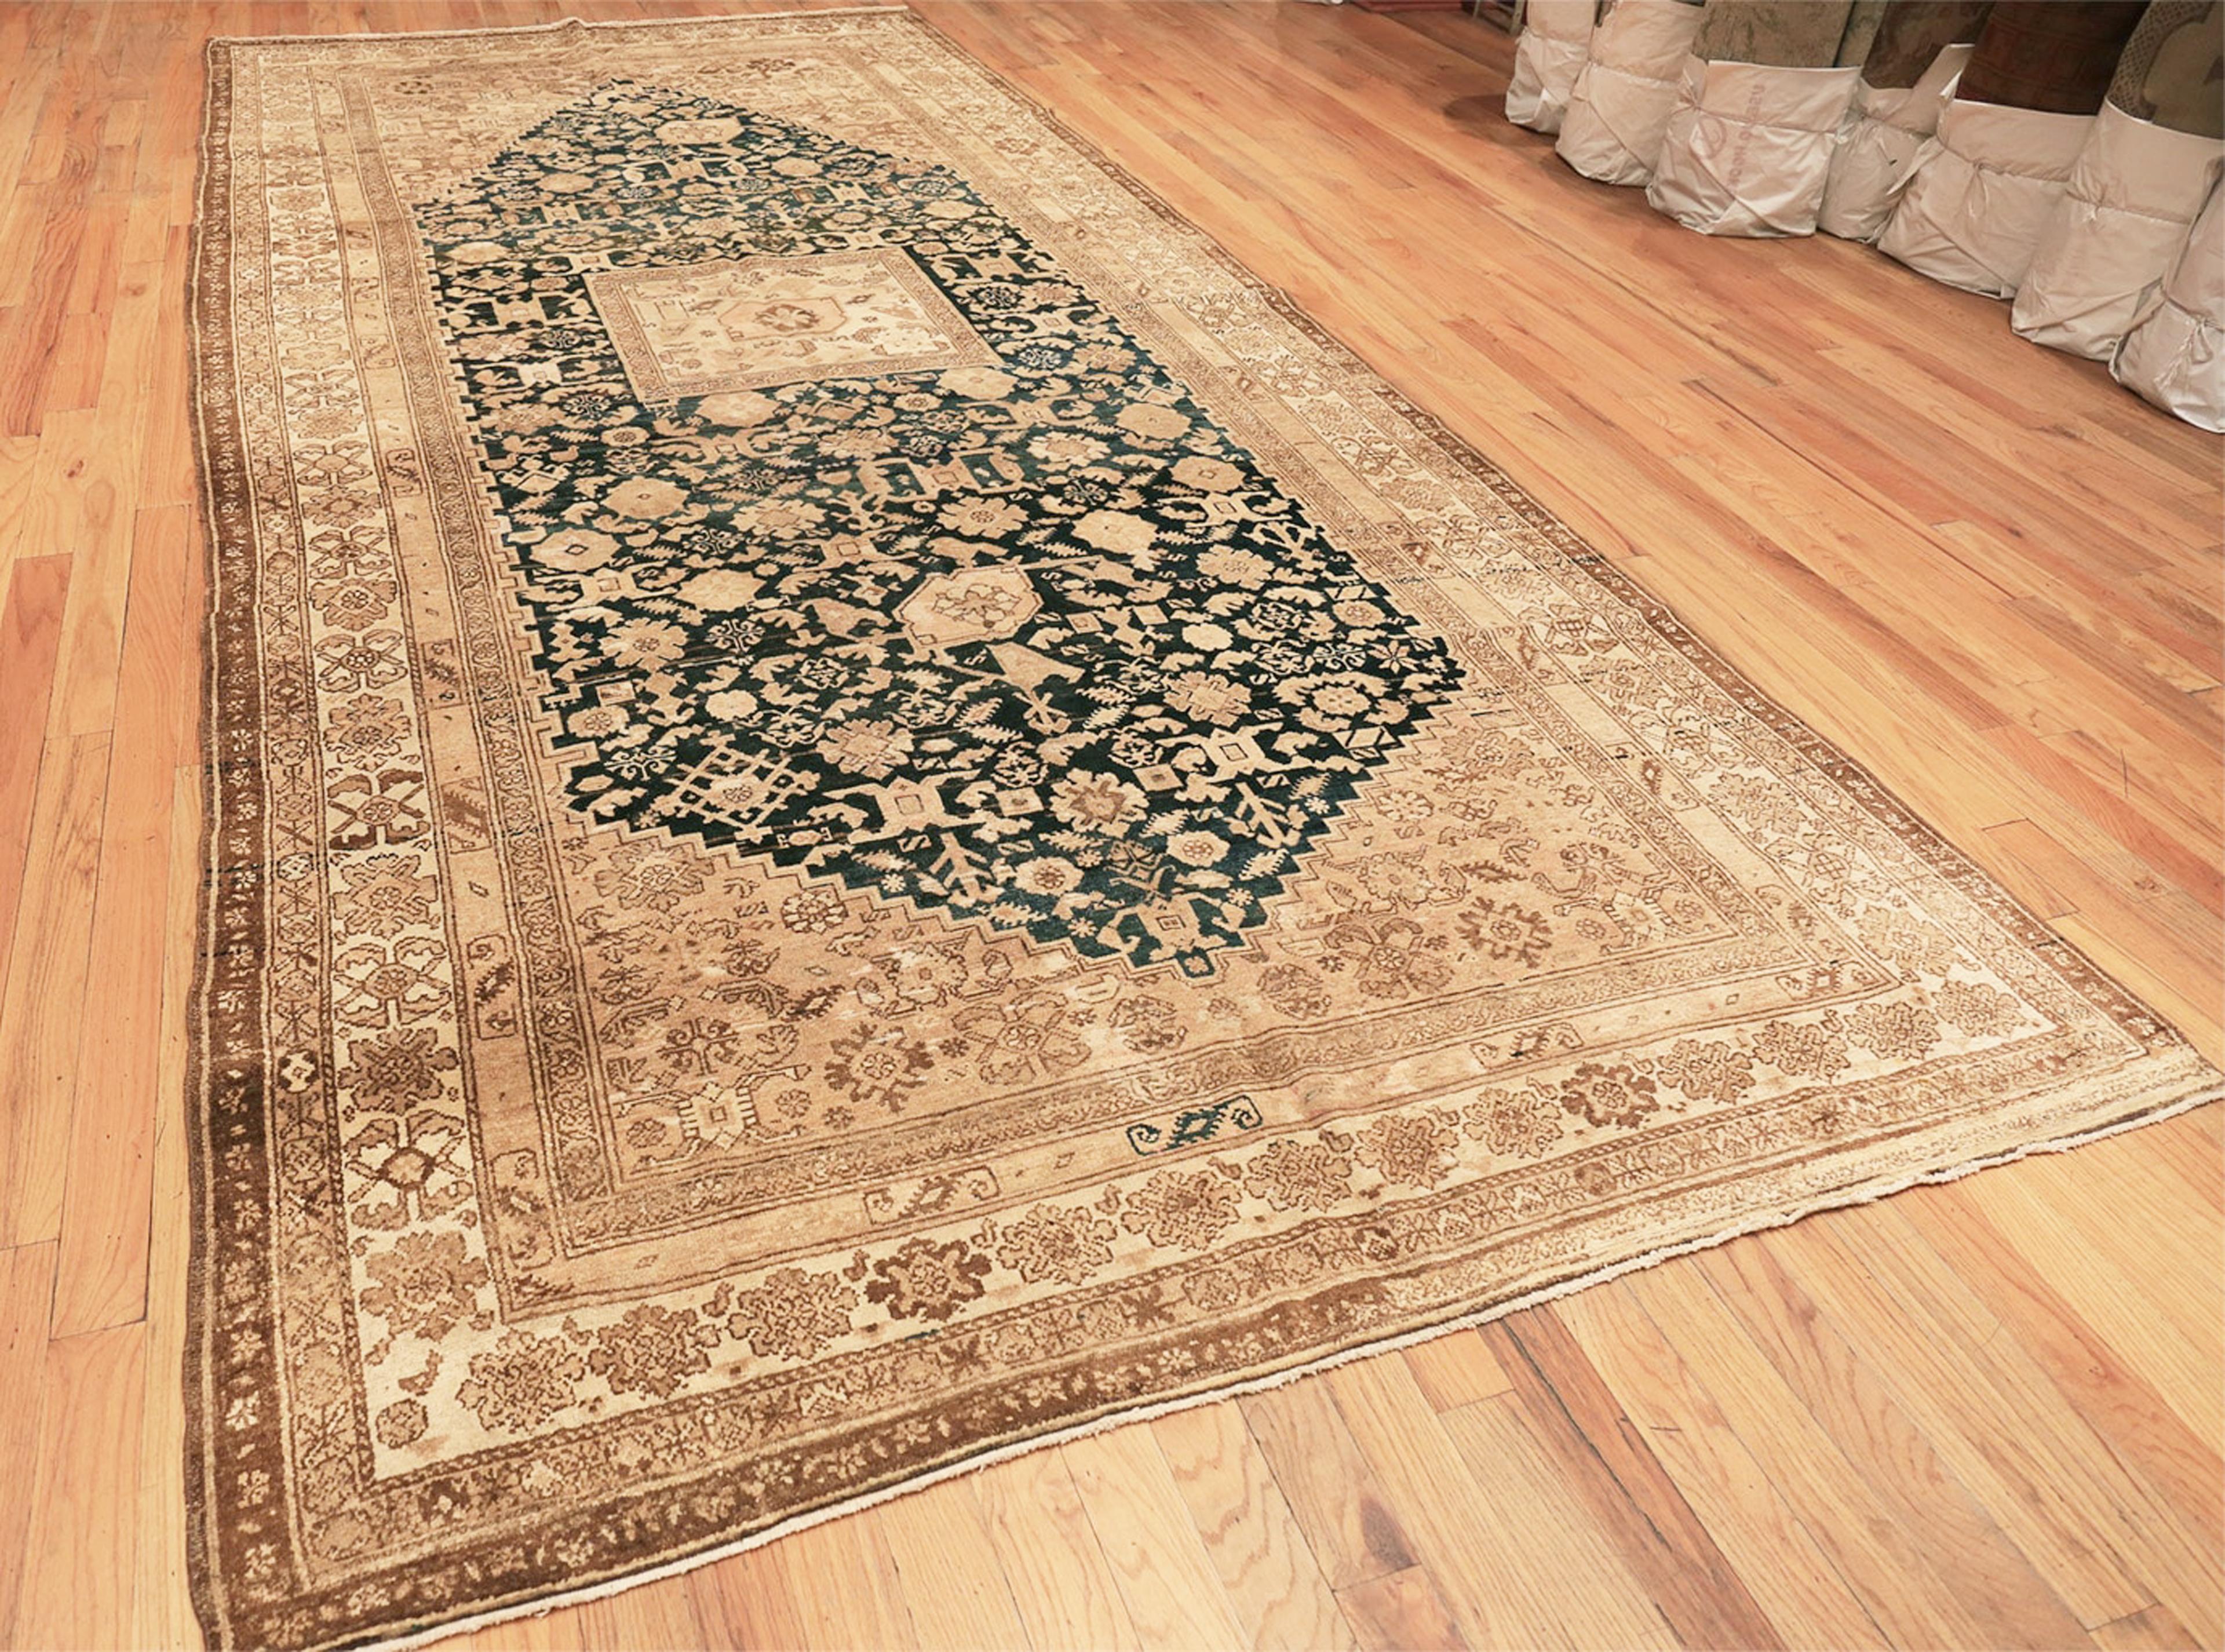 Tribal gallery size antique Persian Malayer rug, country of origin: Persia, date circa 1900. Size: 7 ft x 15 ft 7 in (2.13 m x 4.75 m).

This antique Persian rug is a long banner with an almost black central field that draws the eye. Created in the